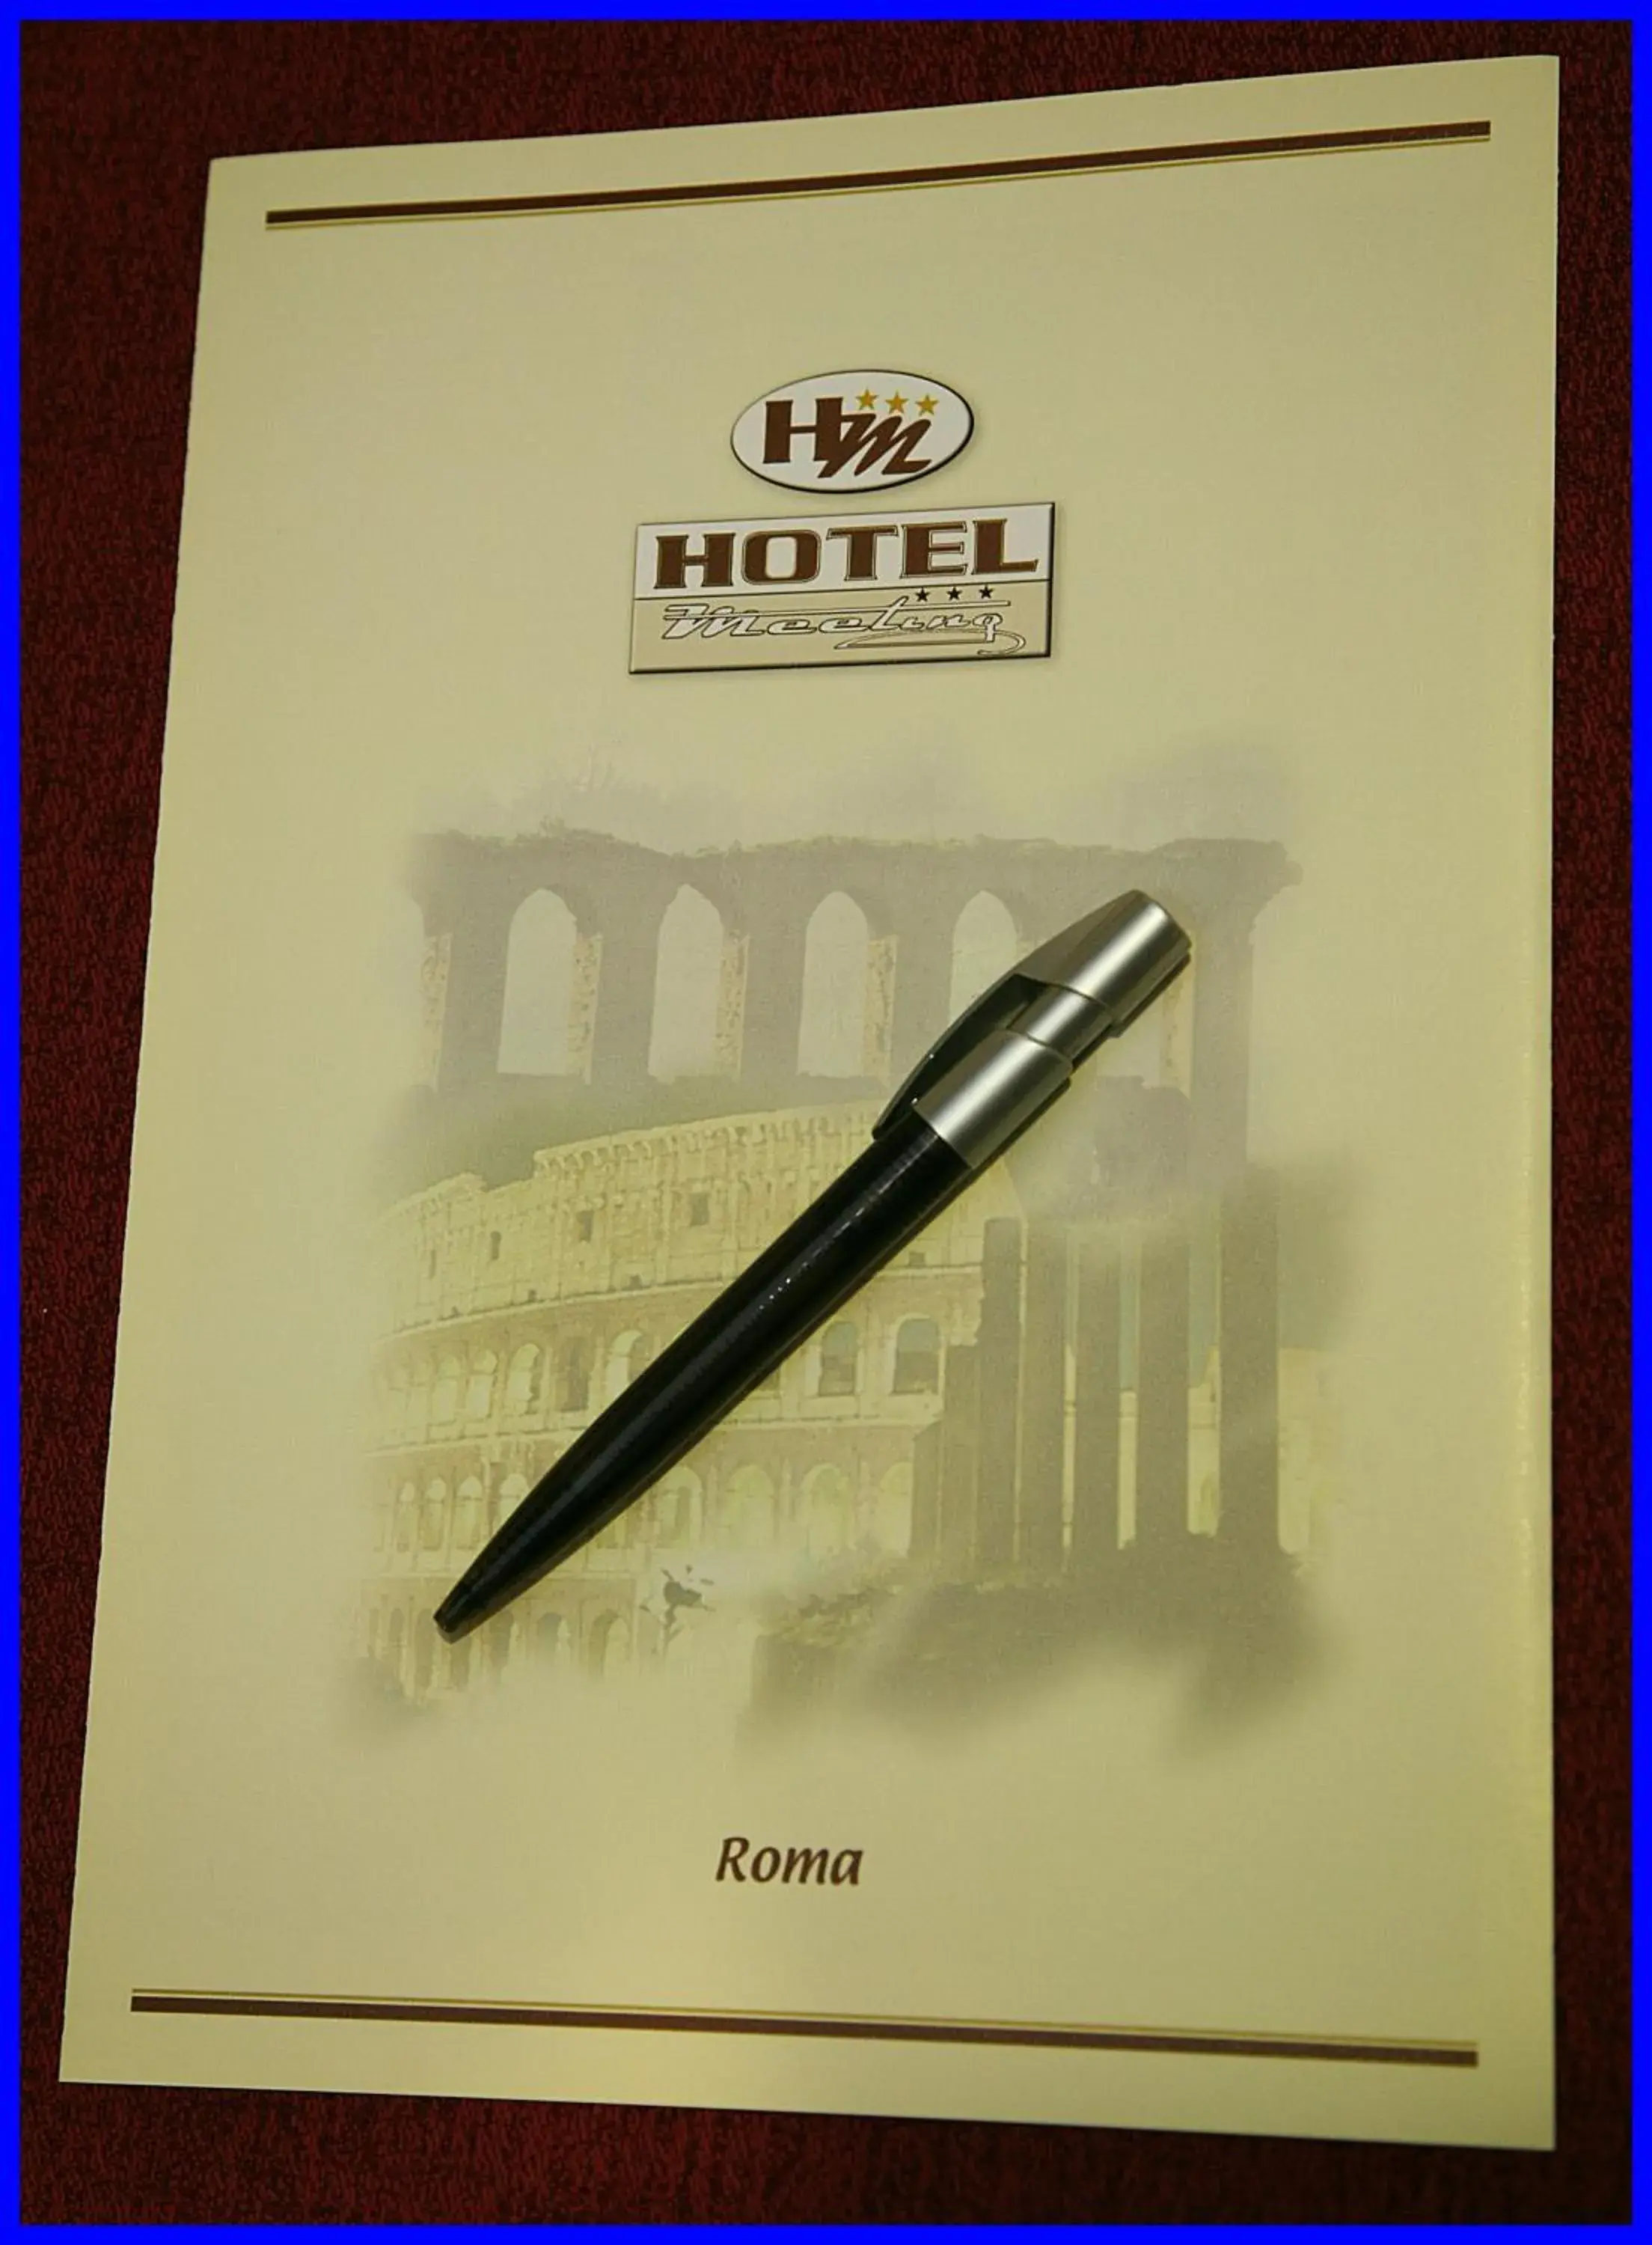 Other, Logo/Certificate/Sign/Award in Hotel Meeting